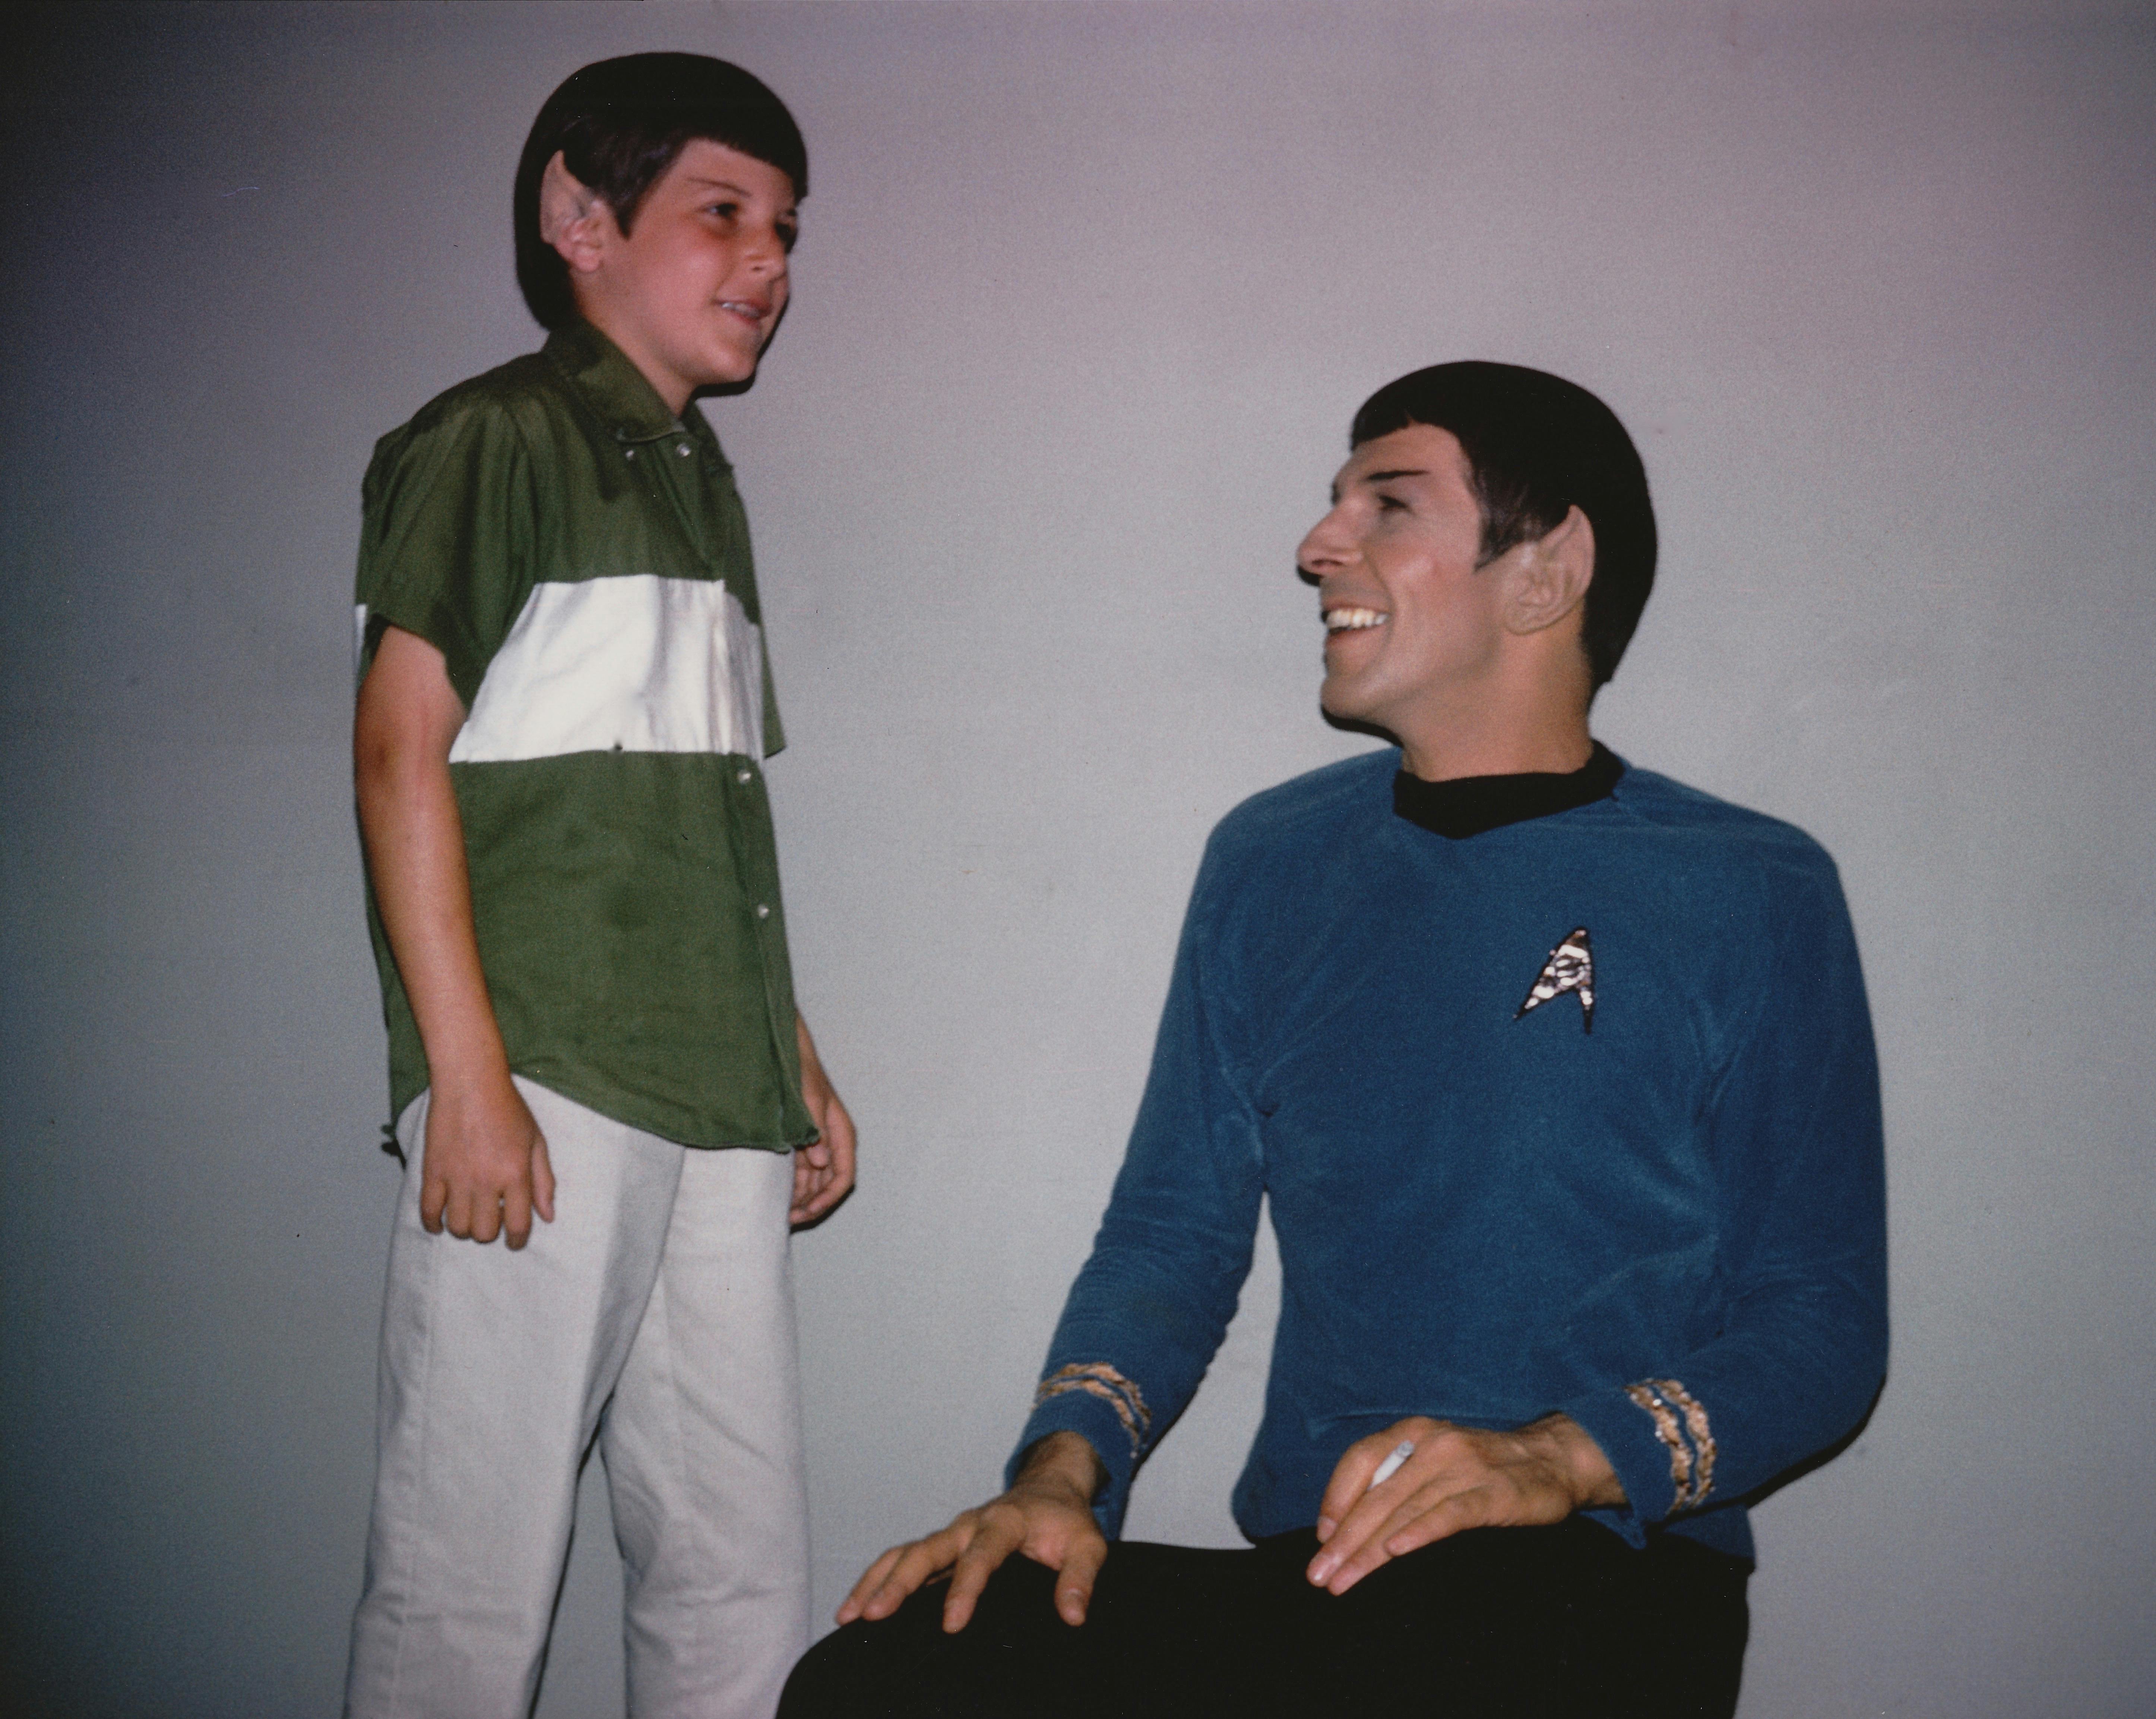 A seated Leonard Nimoy in costume as Spock brightly looks up at his son Adam dressed as his mini Spock